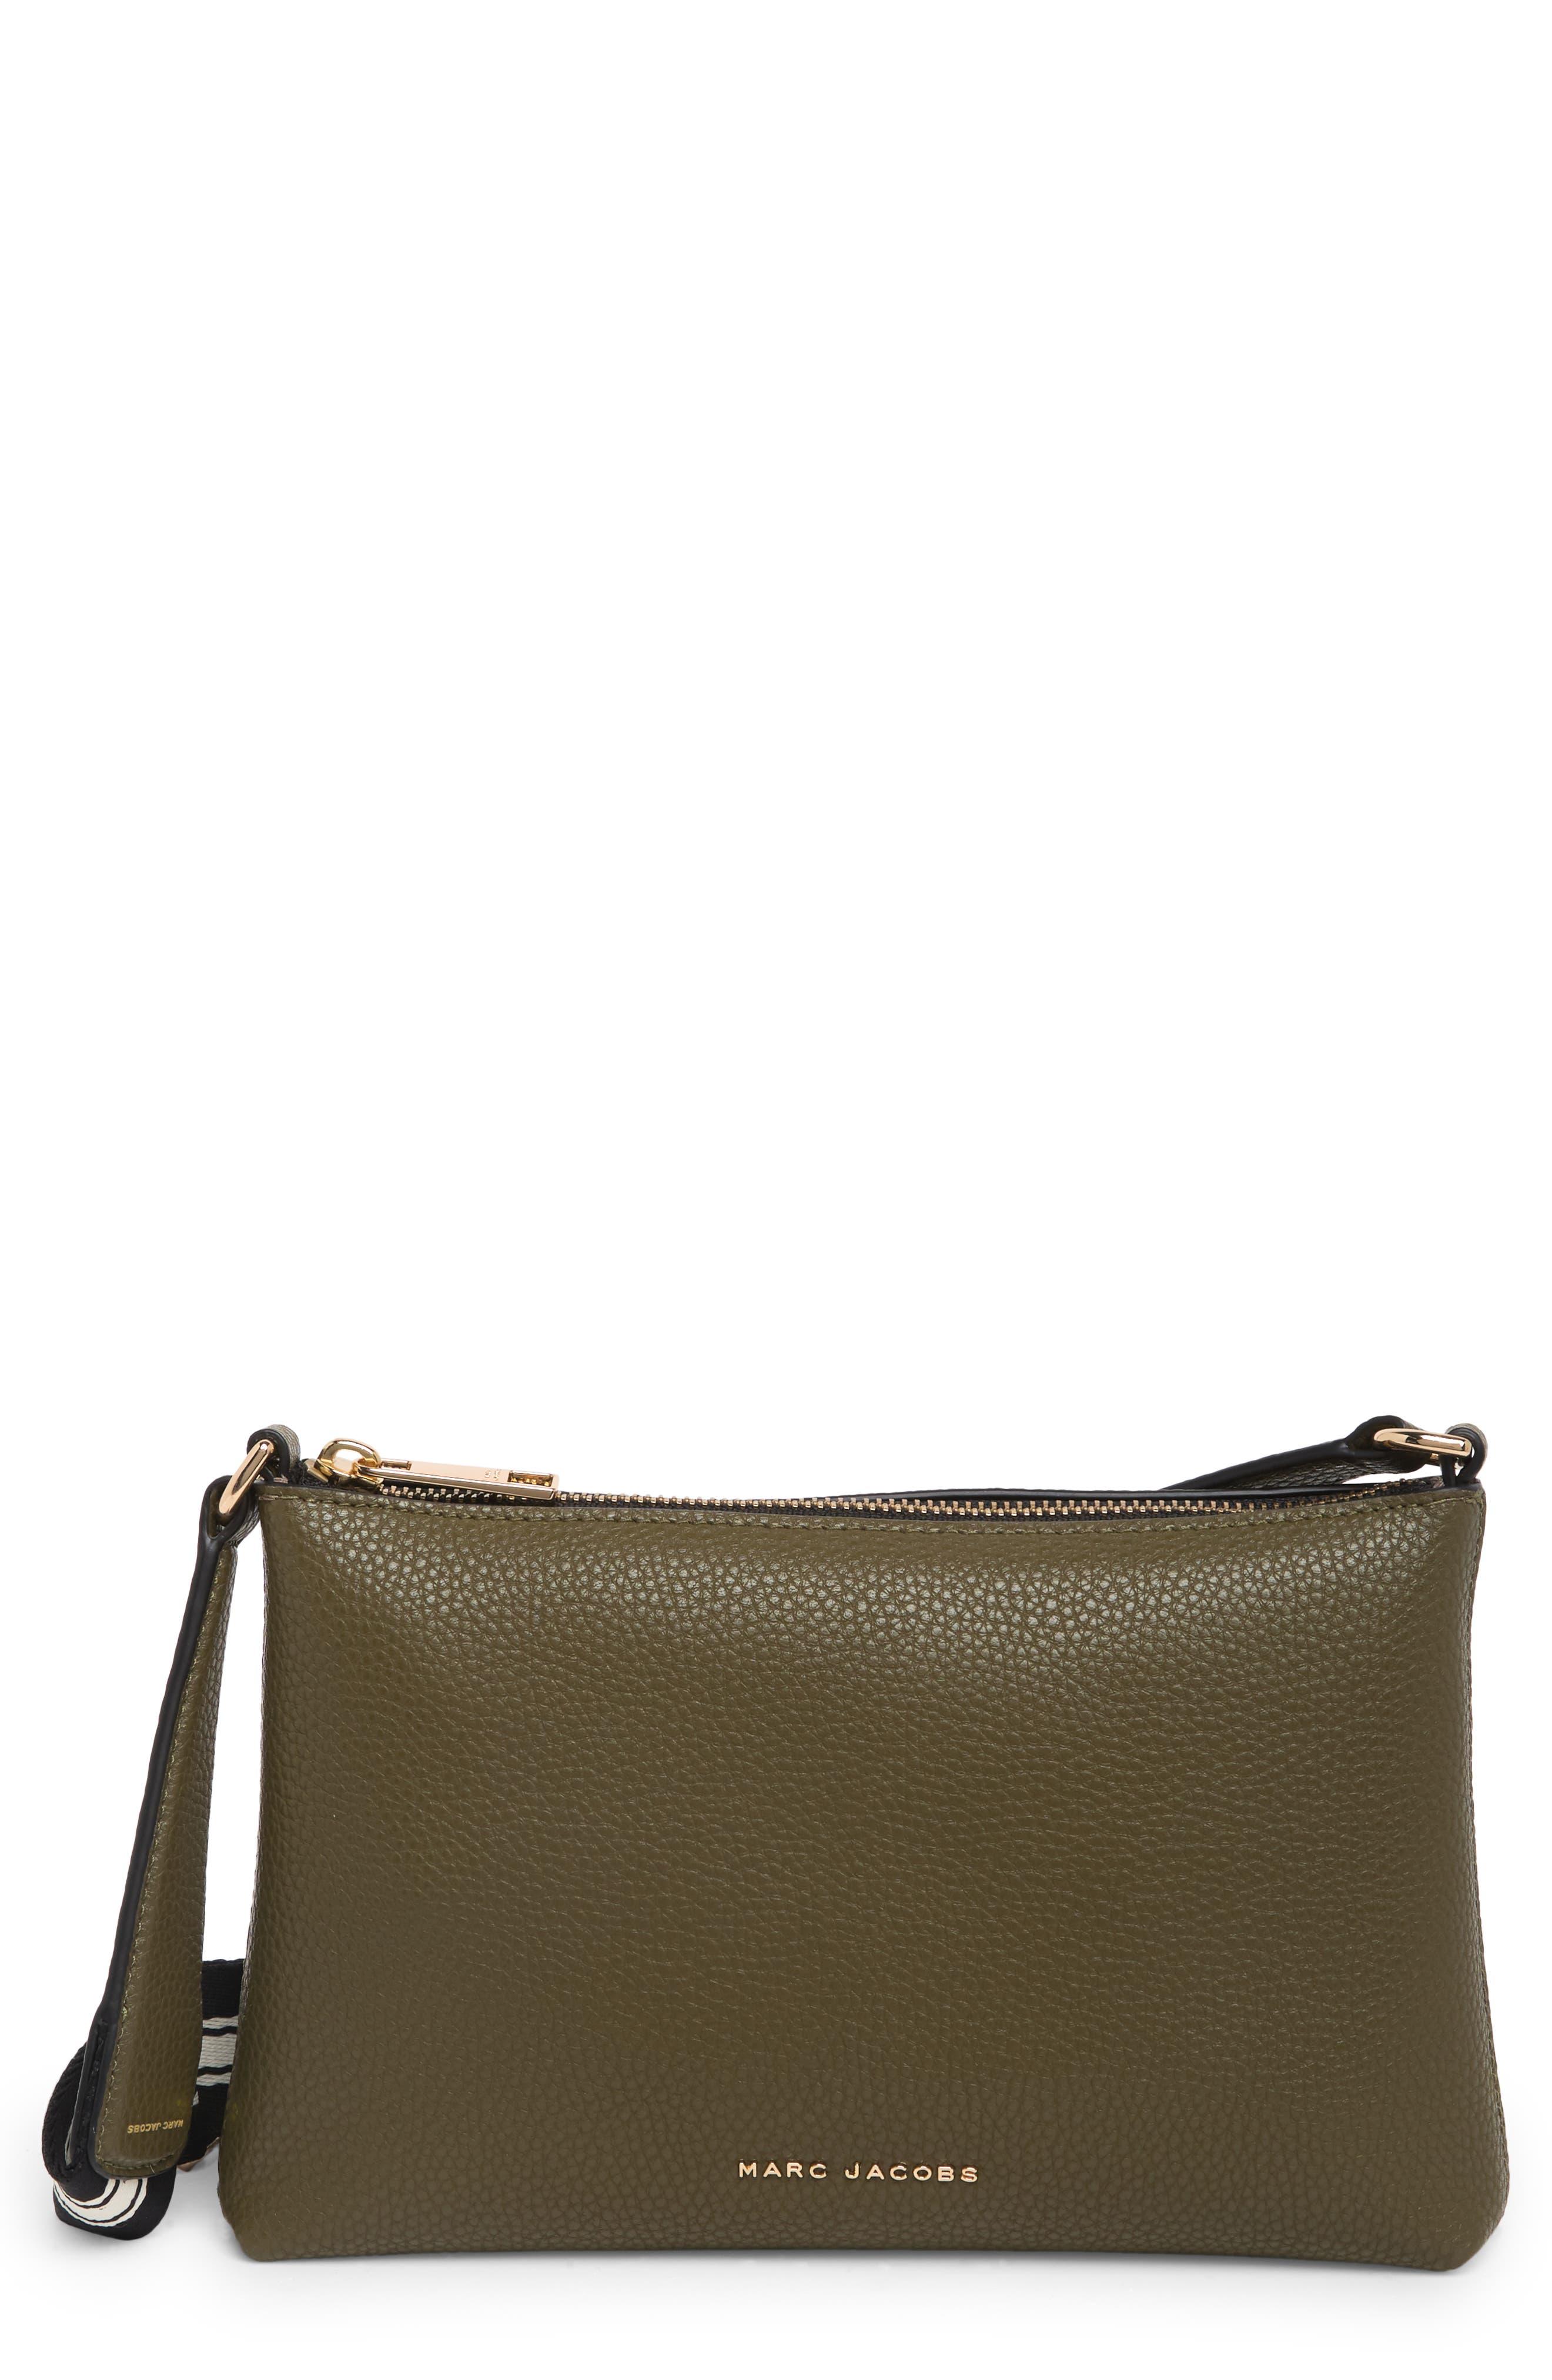 Marc Jacobs The Cosmo Leather Crossbody Bag in White